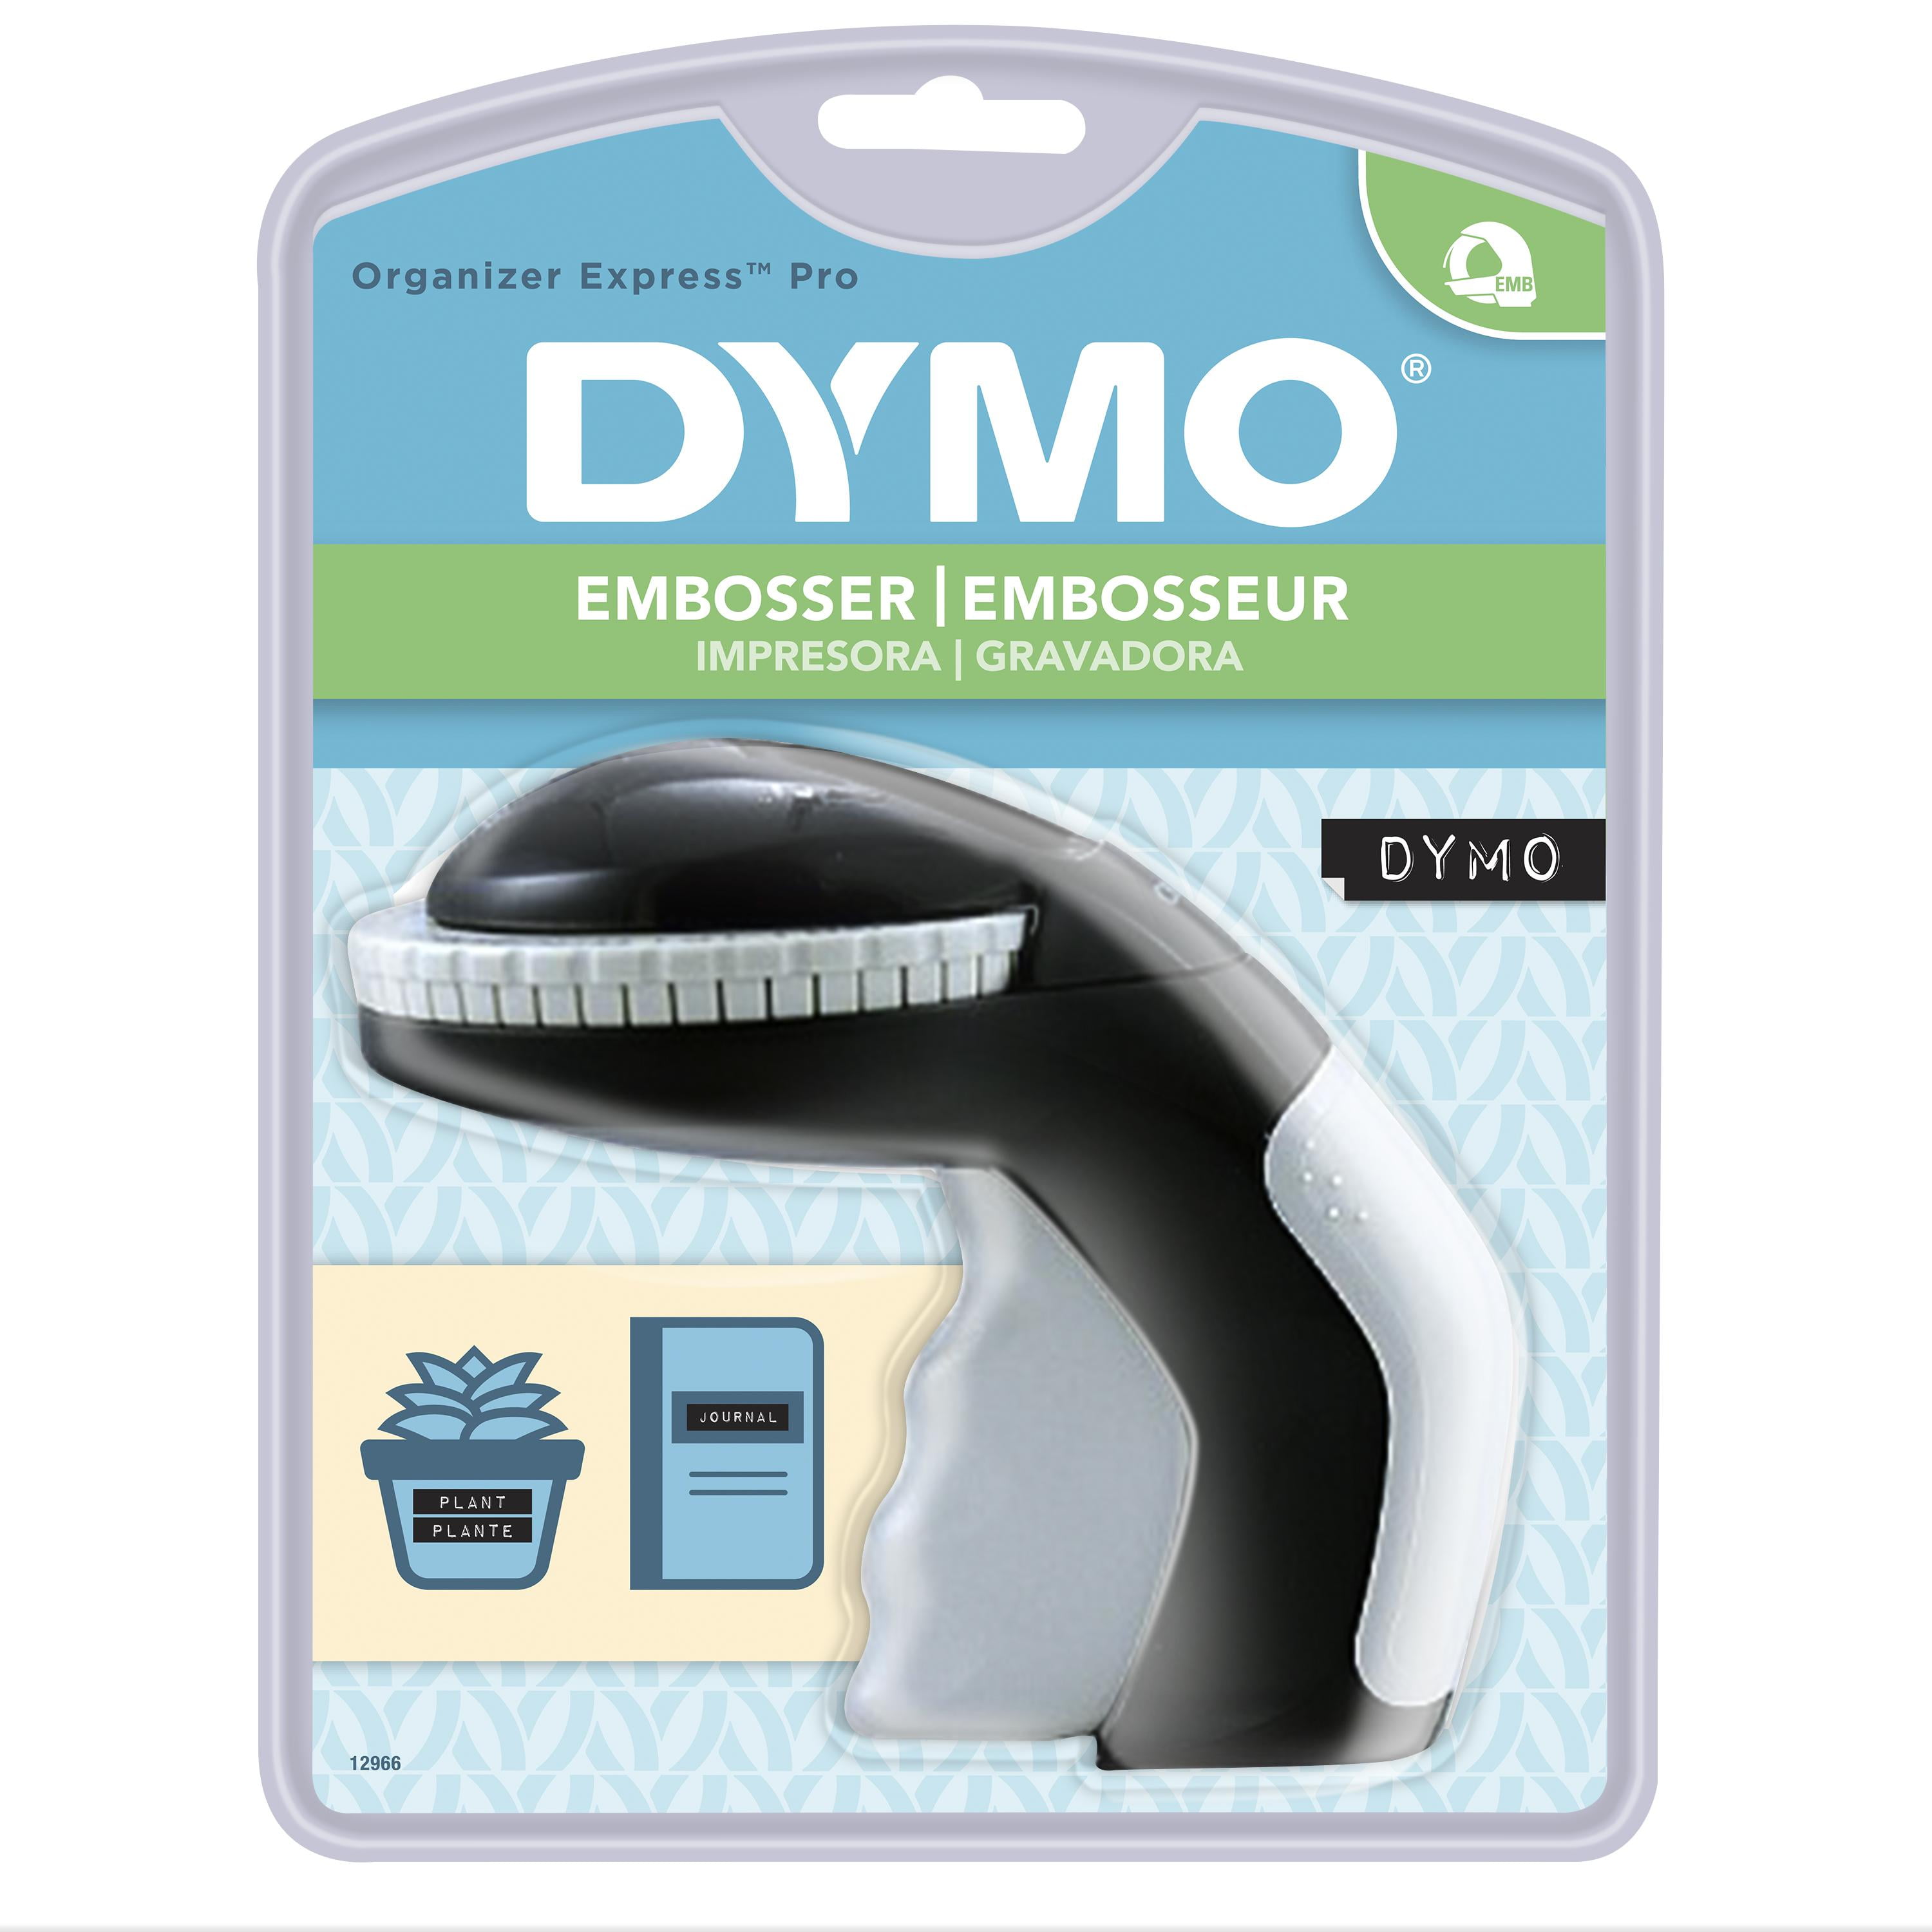 DYMO Embossing Label Maker with 3 DYMO Label TapesOrganizer Xpress Pro Lab... 